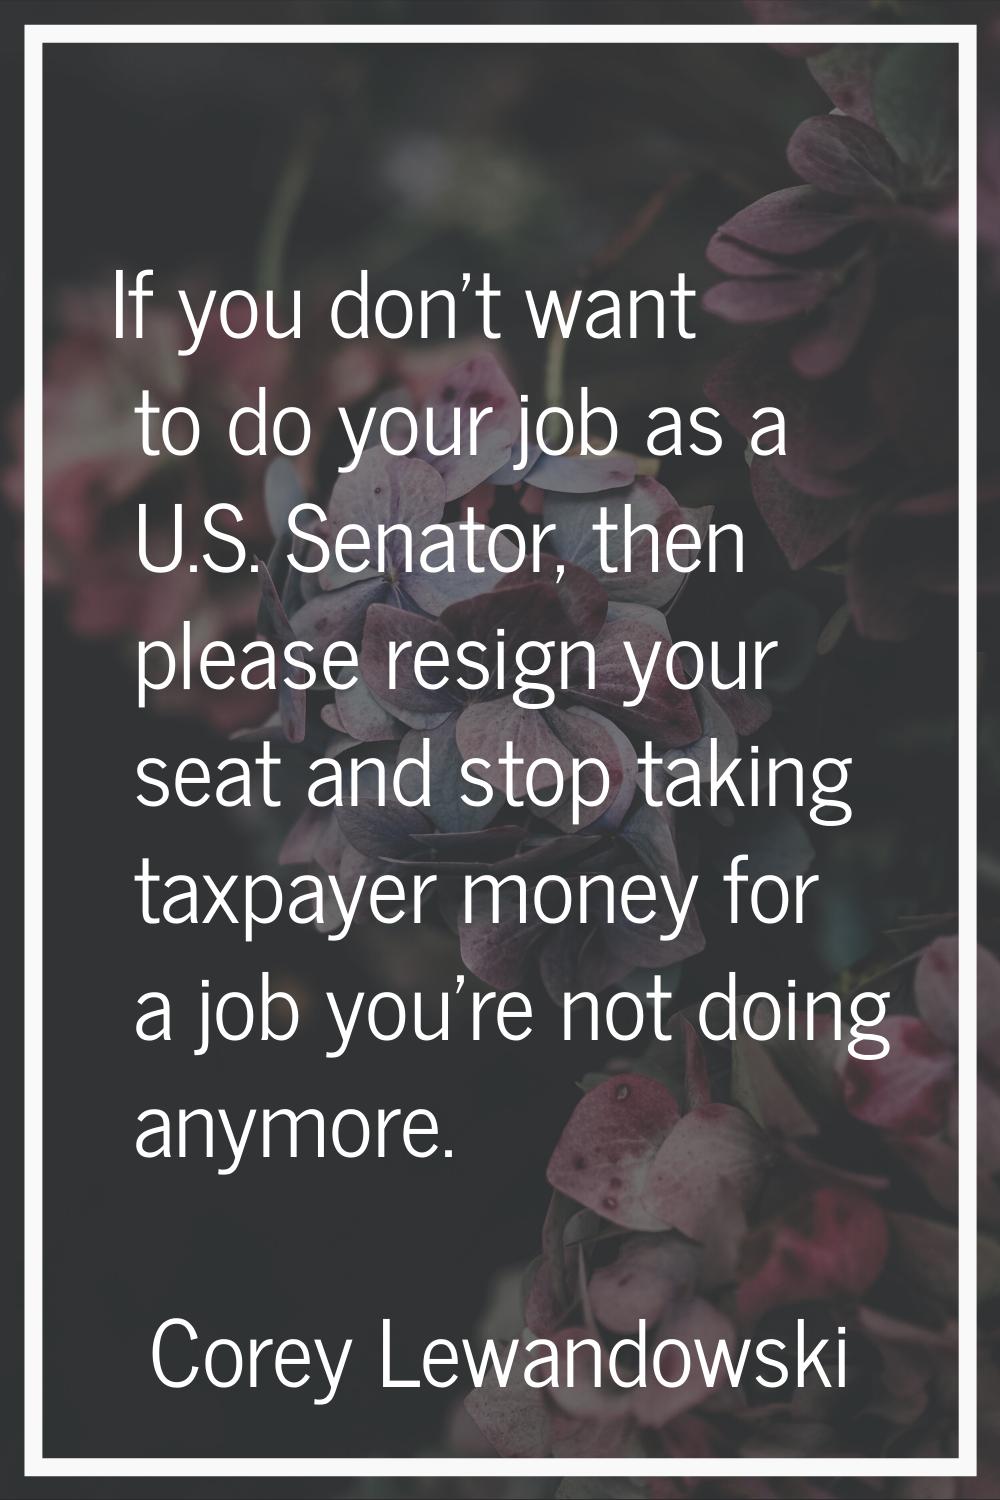 If you don't want to do your job as a U.S. Senator, then please resign your seat and stop taking ta